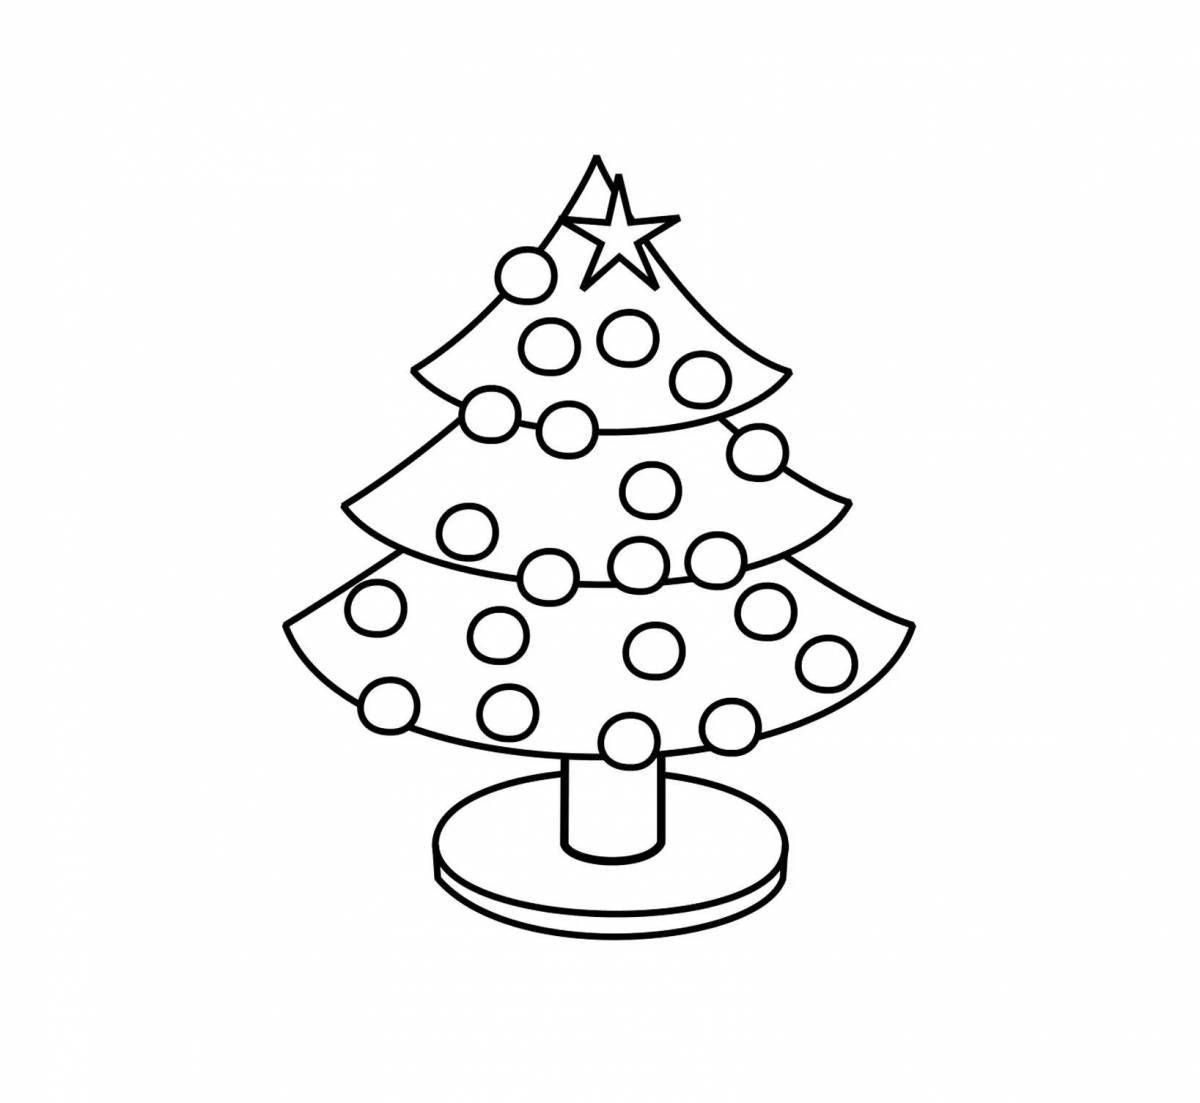 Delightful little tree coloring book